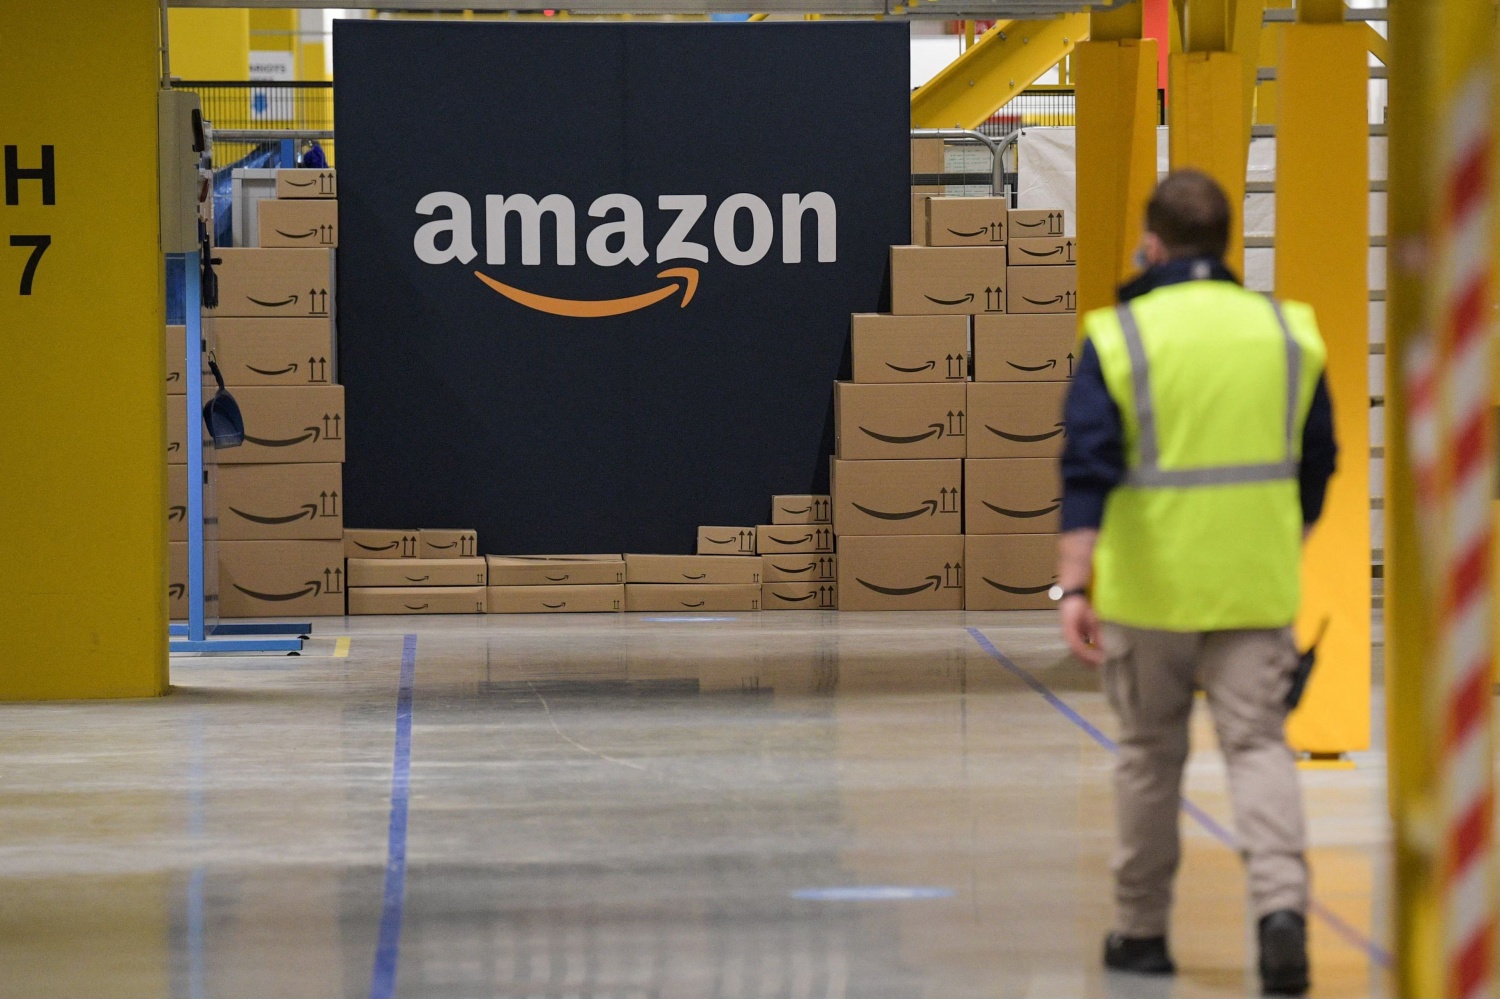 Federal Prosecutors, Department of Labor Probes into Amazon's Work Facilities